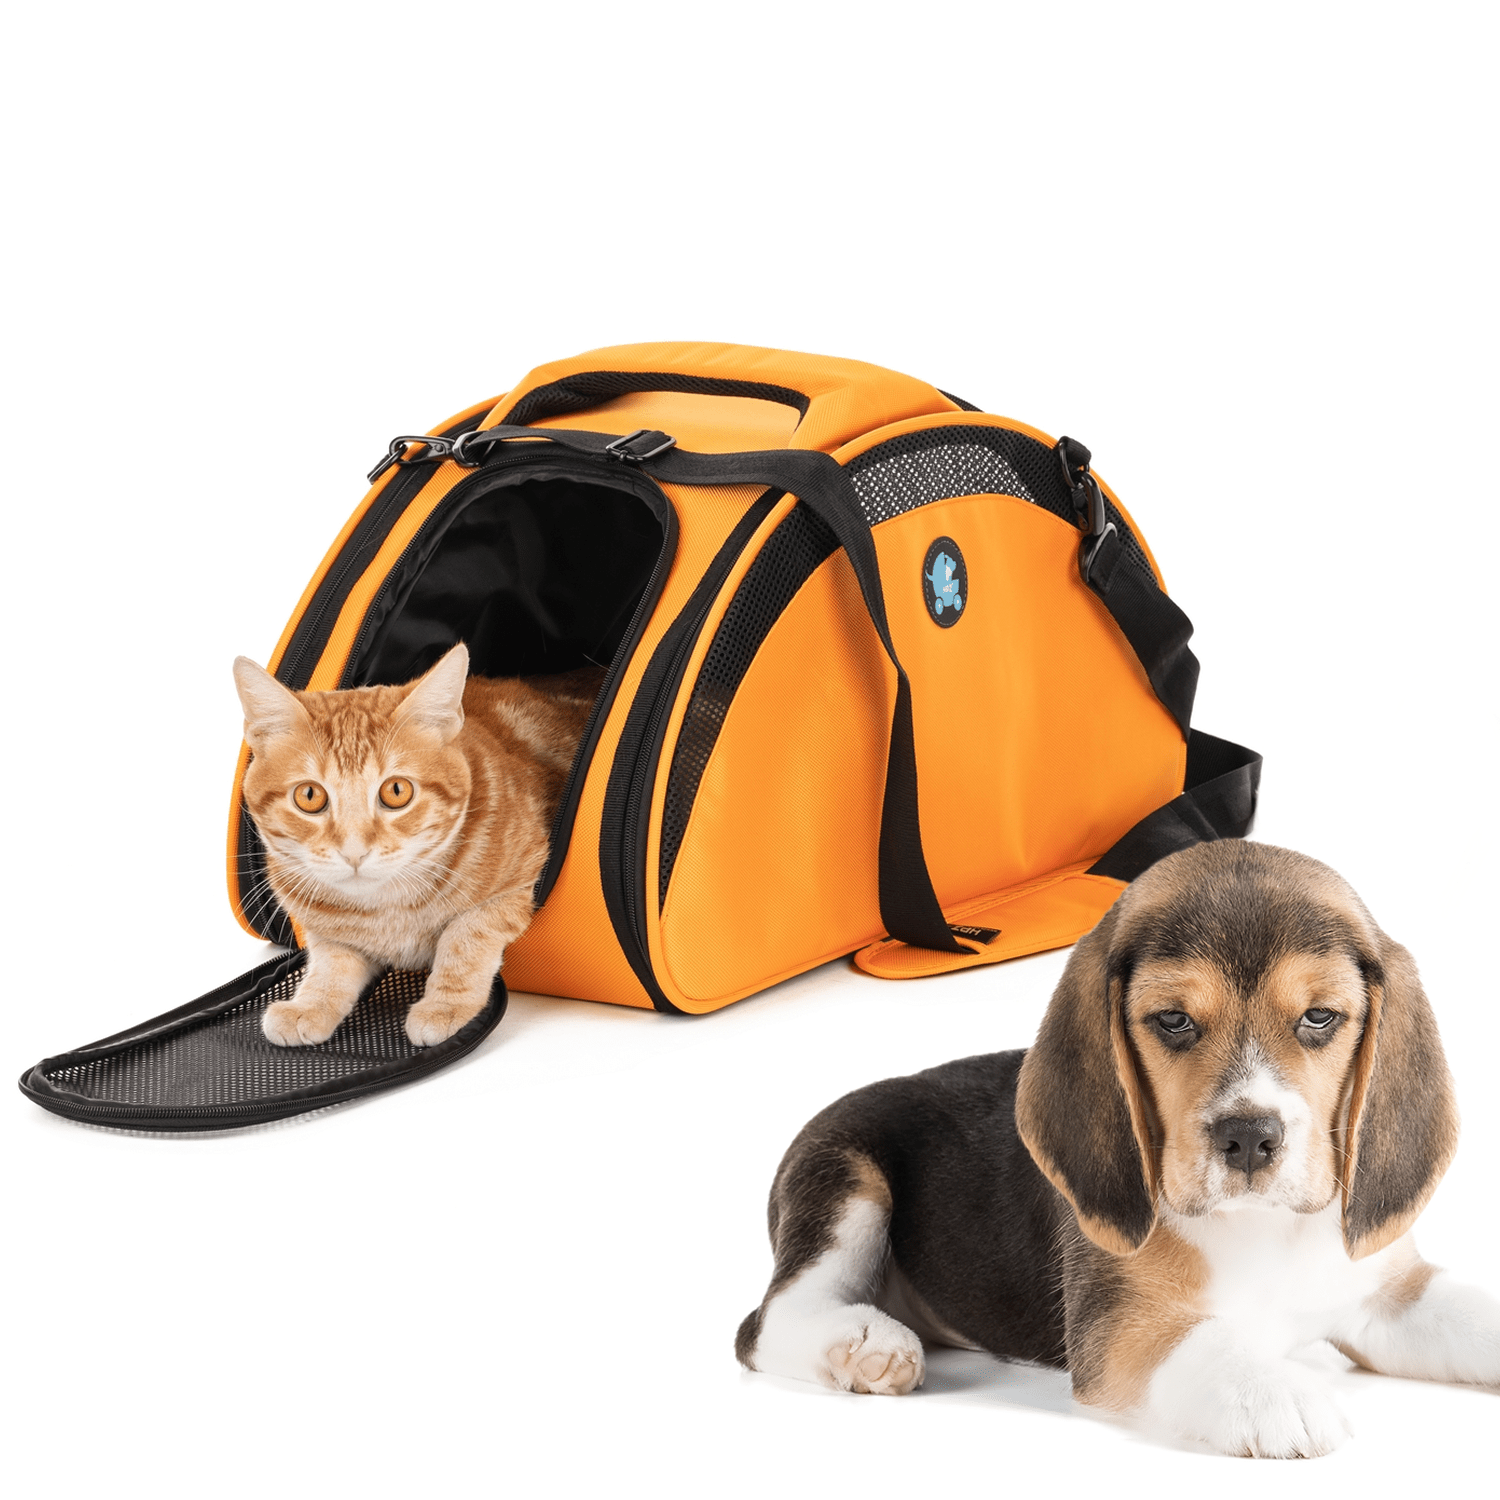 SturdiBag™ - Small Pet Carrier for Toy Dog Breeds and Cats